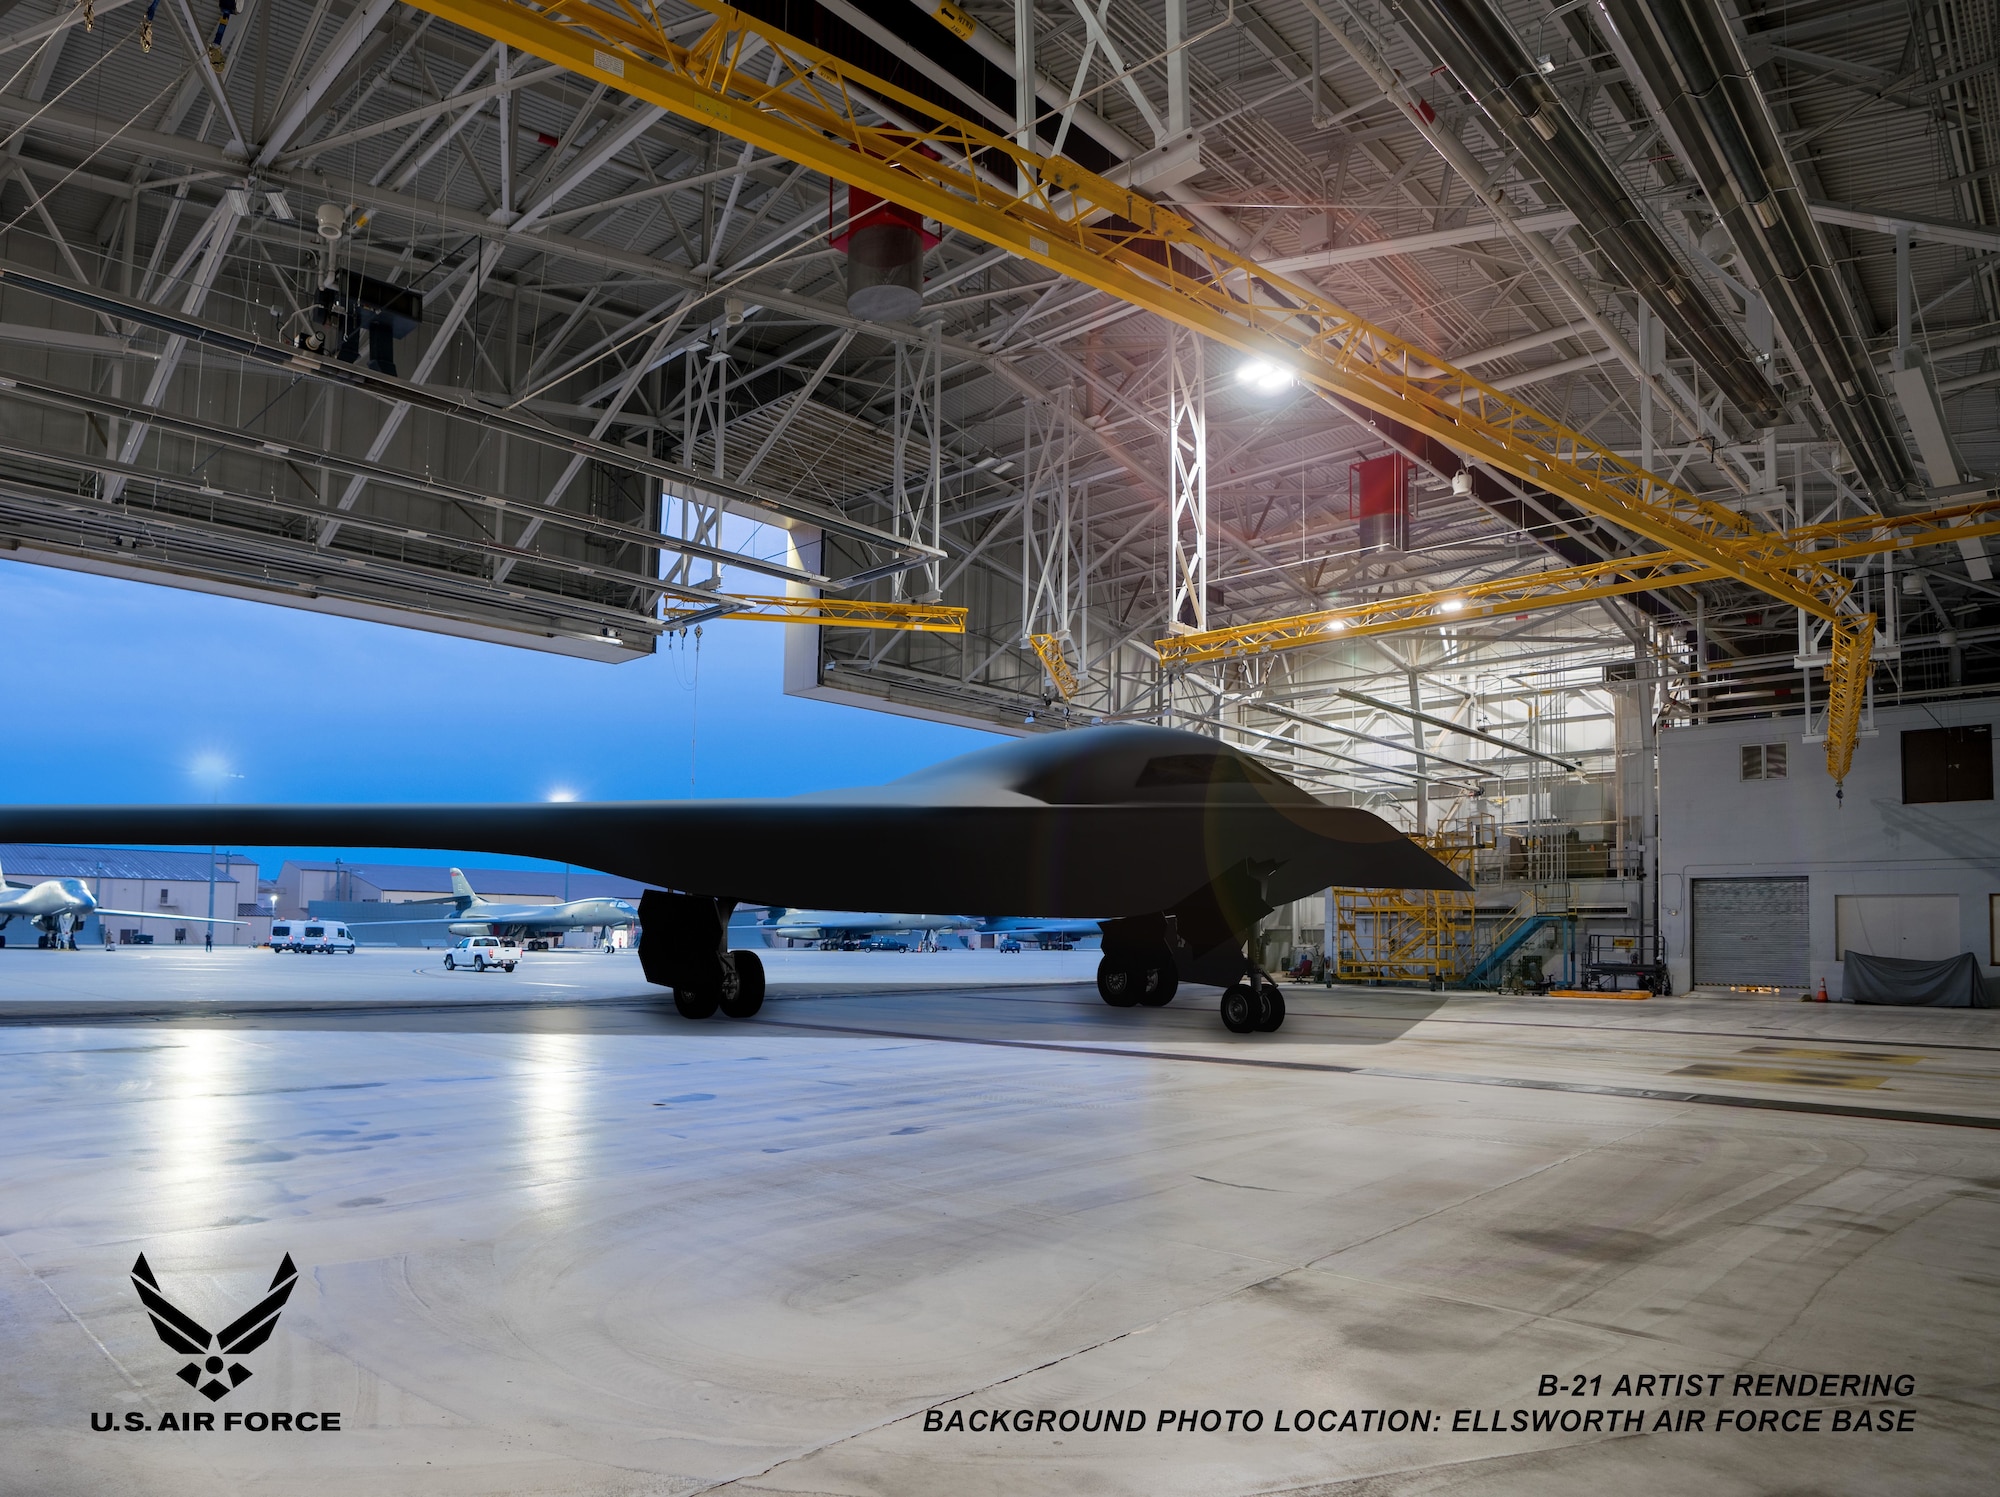 Shown is an artist rendering of a B-21 Raider concept in a hangar at Ellsworth Air Force Base, S.D. Ellsworth AFB is one of the bases expected to host the new airframe. (U.S. Air Force courtesy graphic by Northrop Grumman)